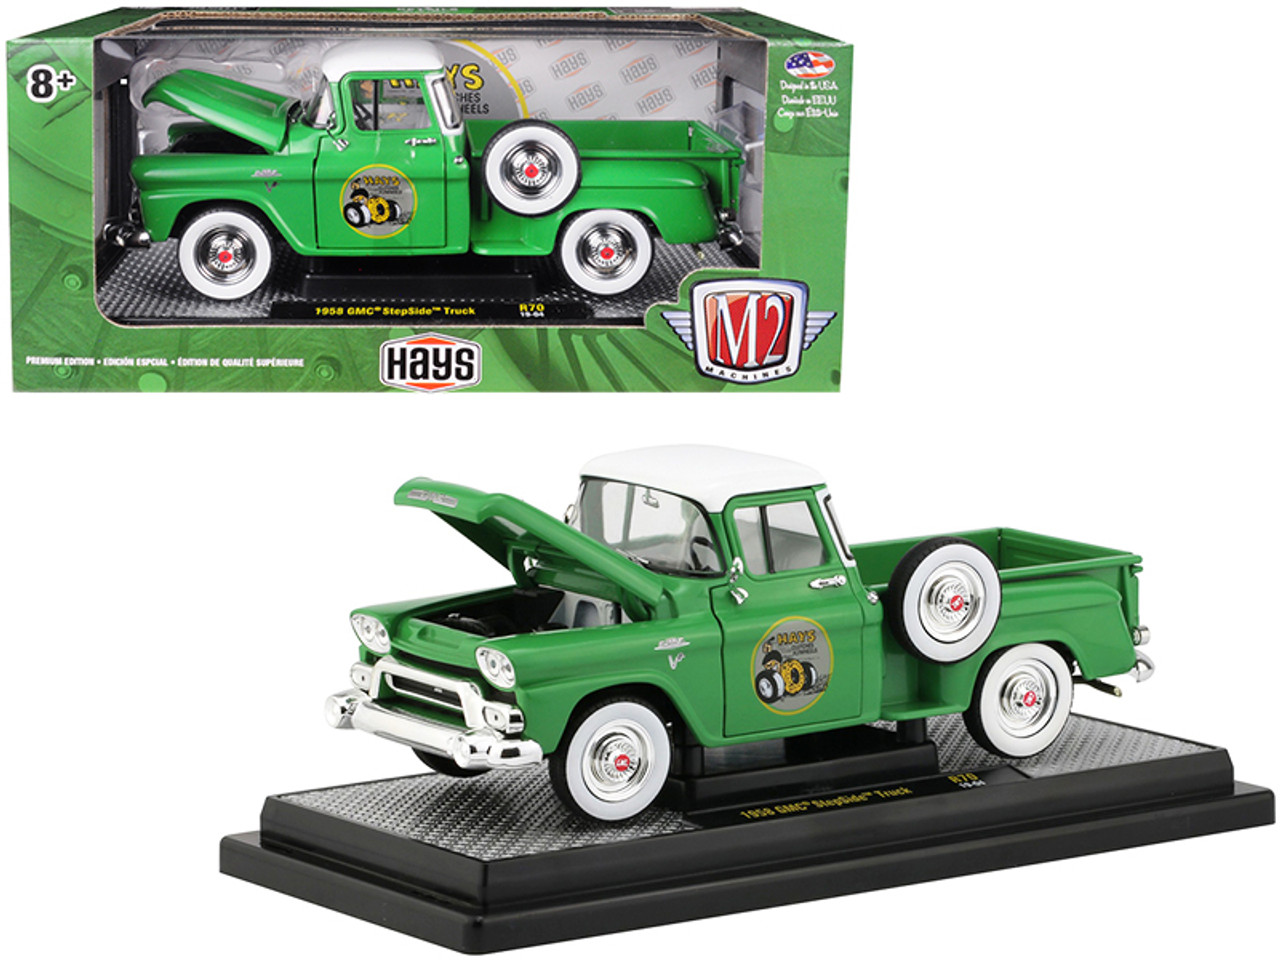 1958 GMC Stepside Pickup Truck Aspen Green with Bright White Top "HAYS" Limited Edition to 5880 pieces Worldwide 1/24 Diecast Model Car by M2 Machines